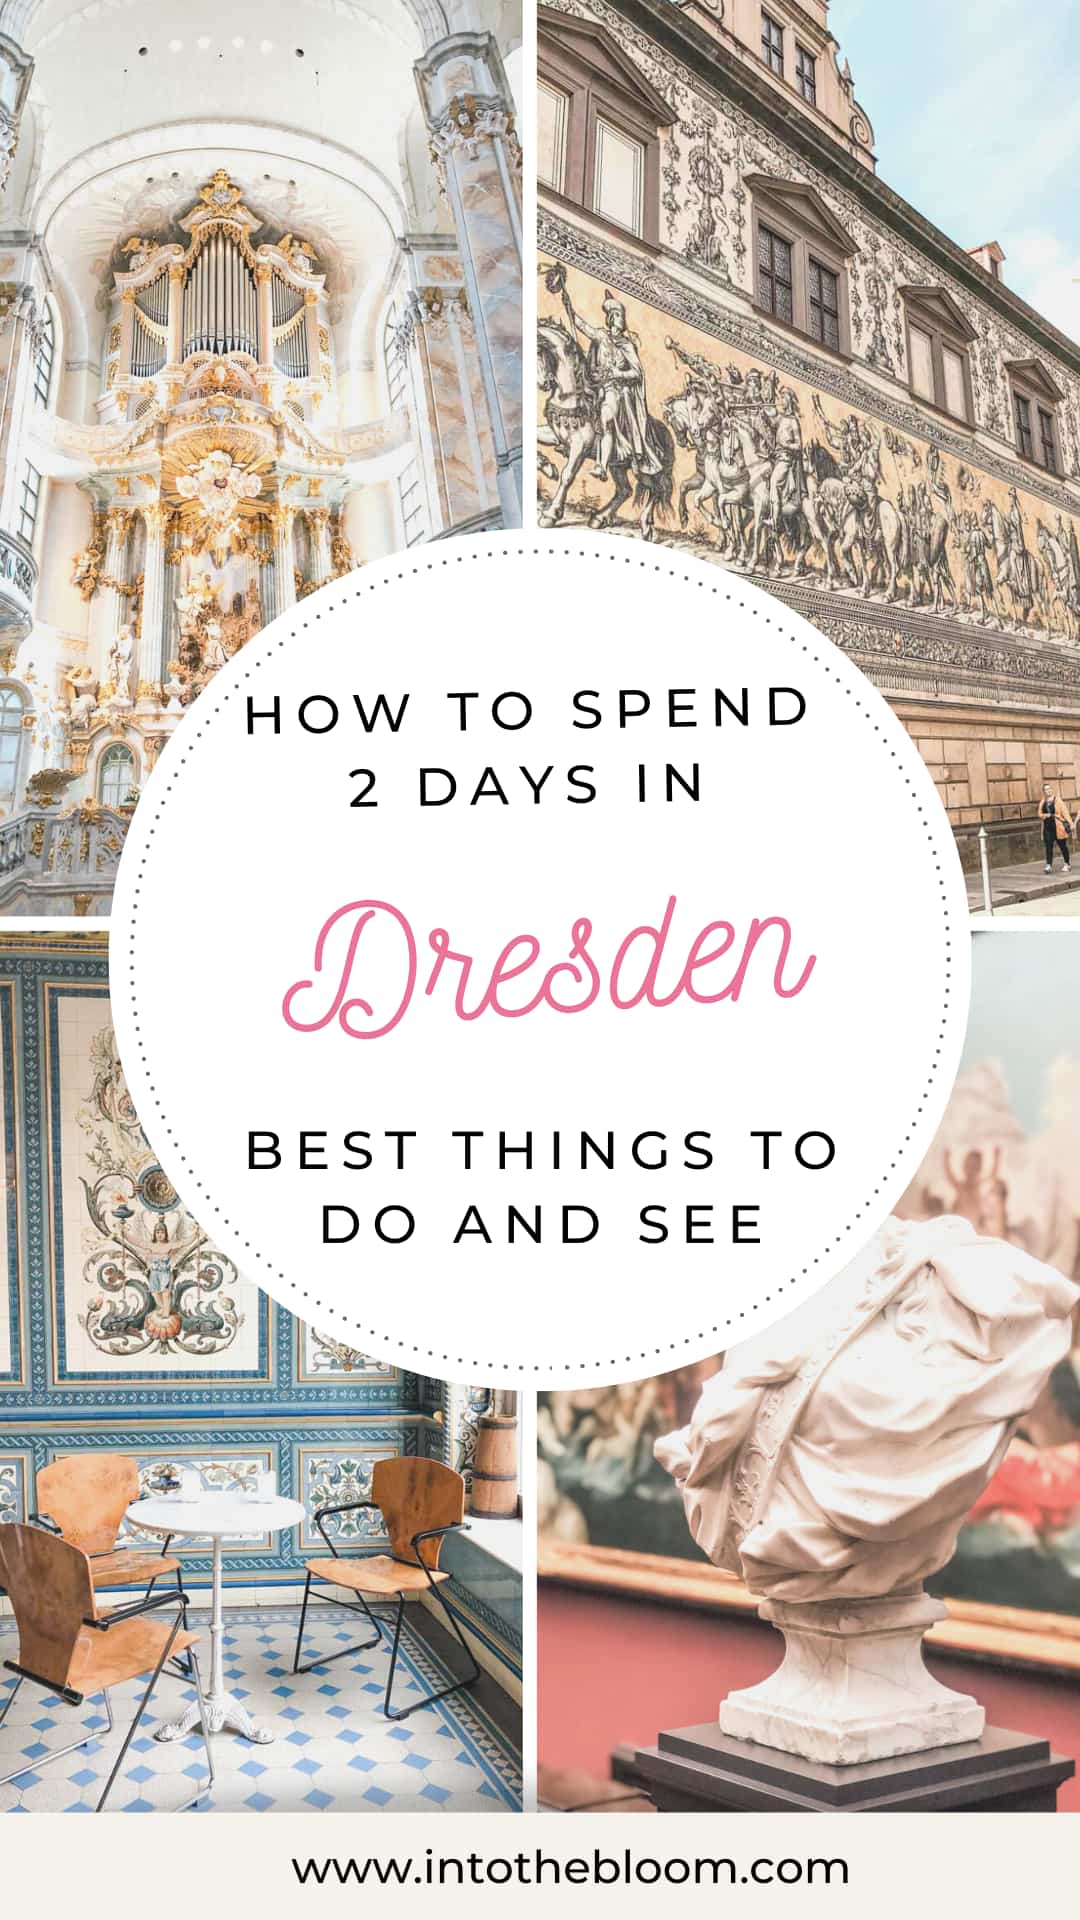 How to spend the perfect 2 days in Dresden - best places to stay, see, and eat